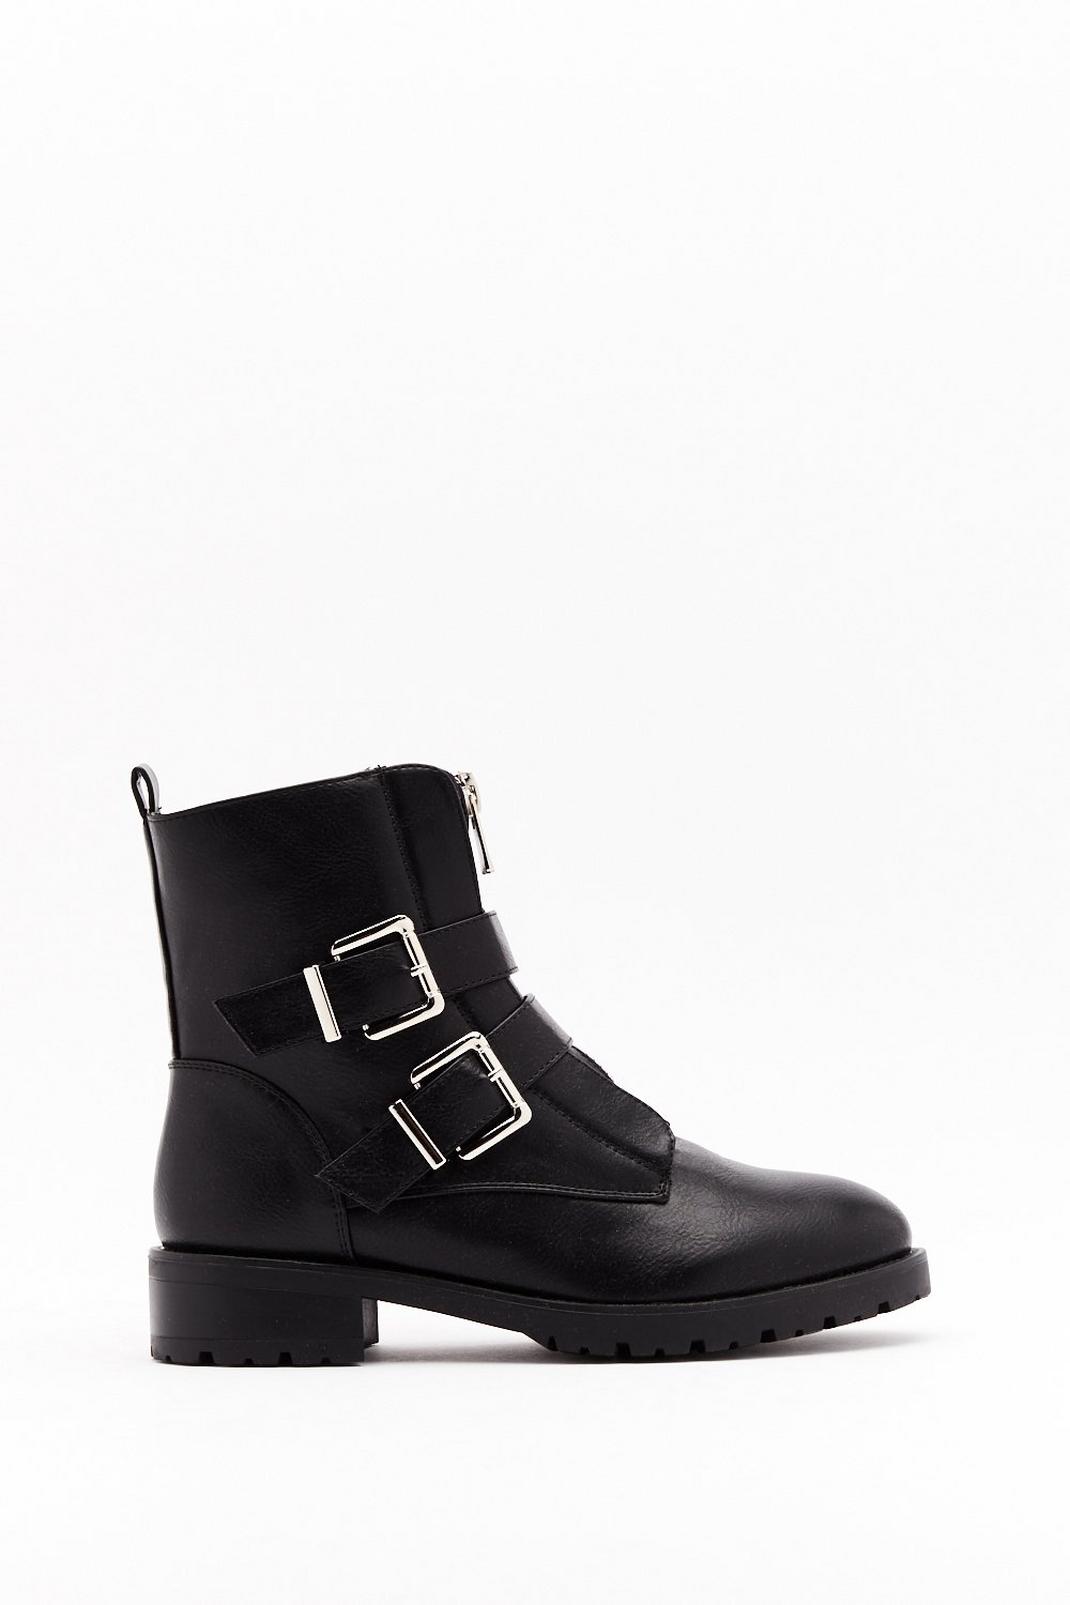 Zip Takes Two Faux Leather Biker Boots image number 1